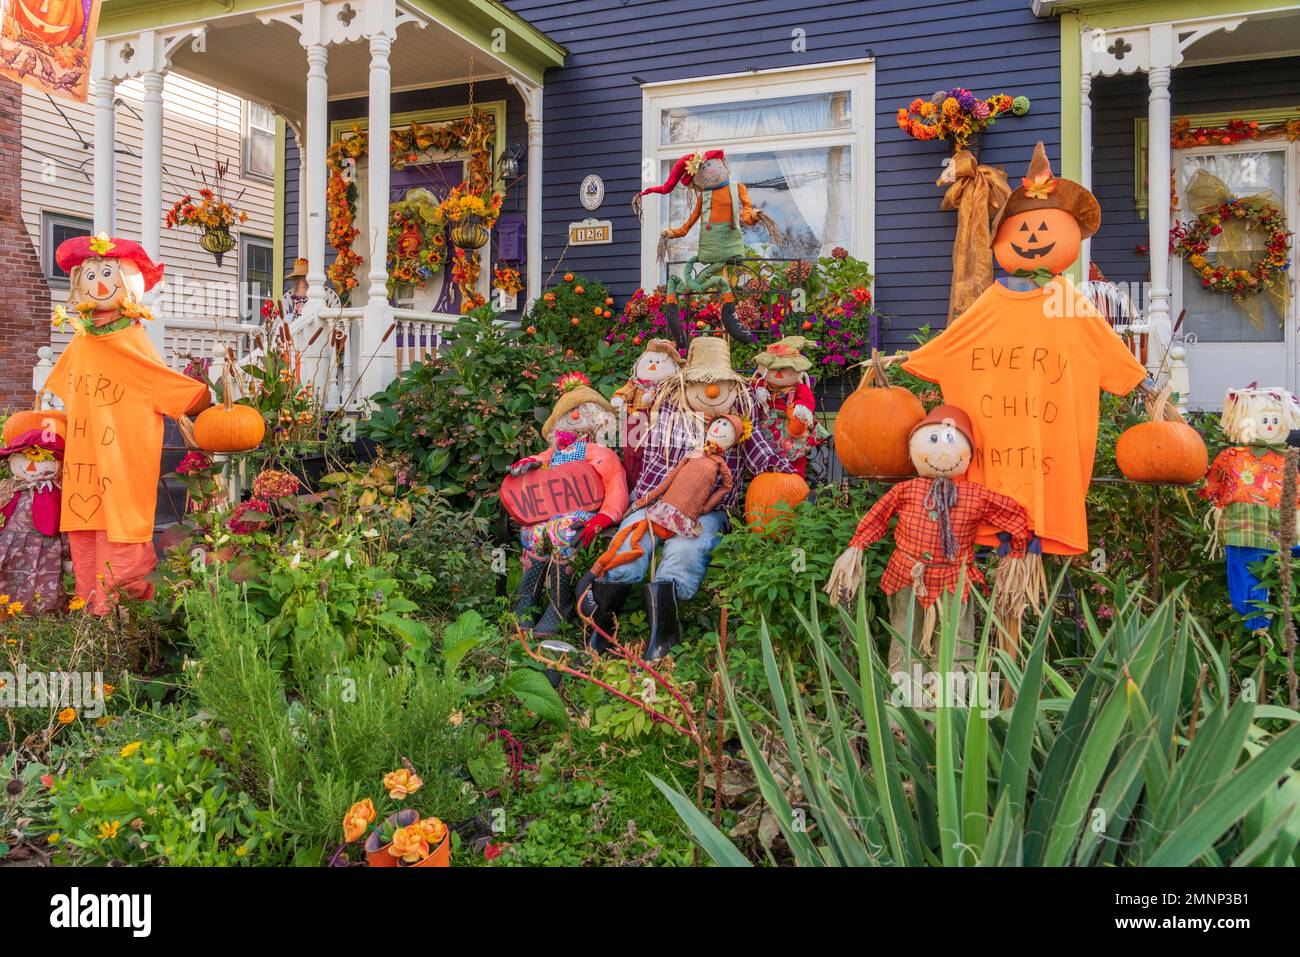 A pumpkin and scarecrow display in the front yard of a home in Truro, Nova Scotia, Canada. Stock Photo